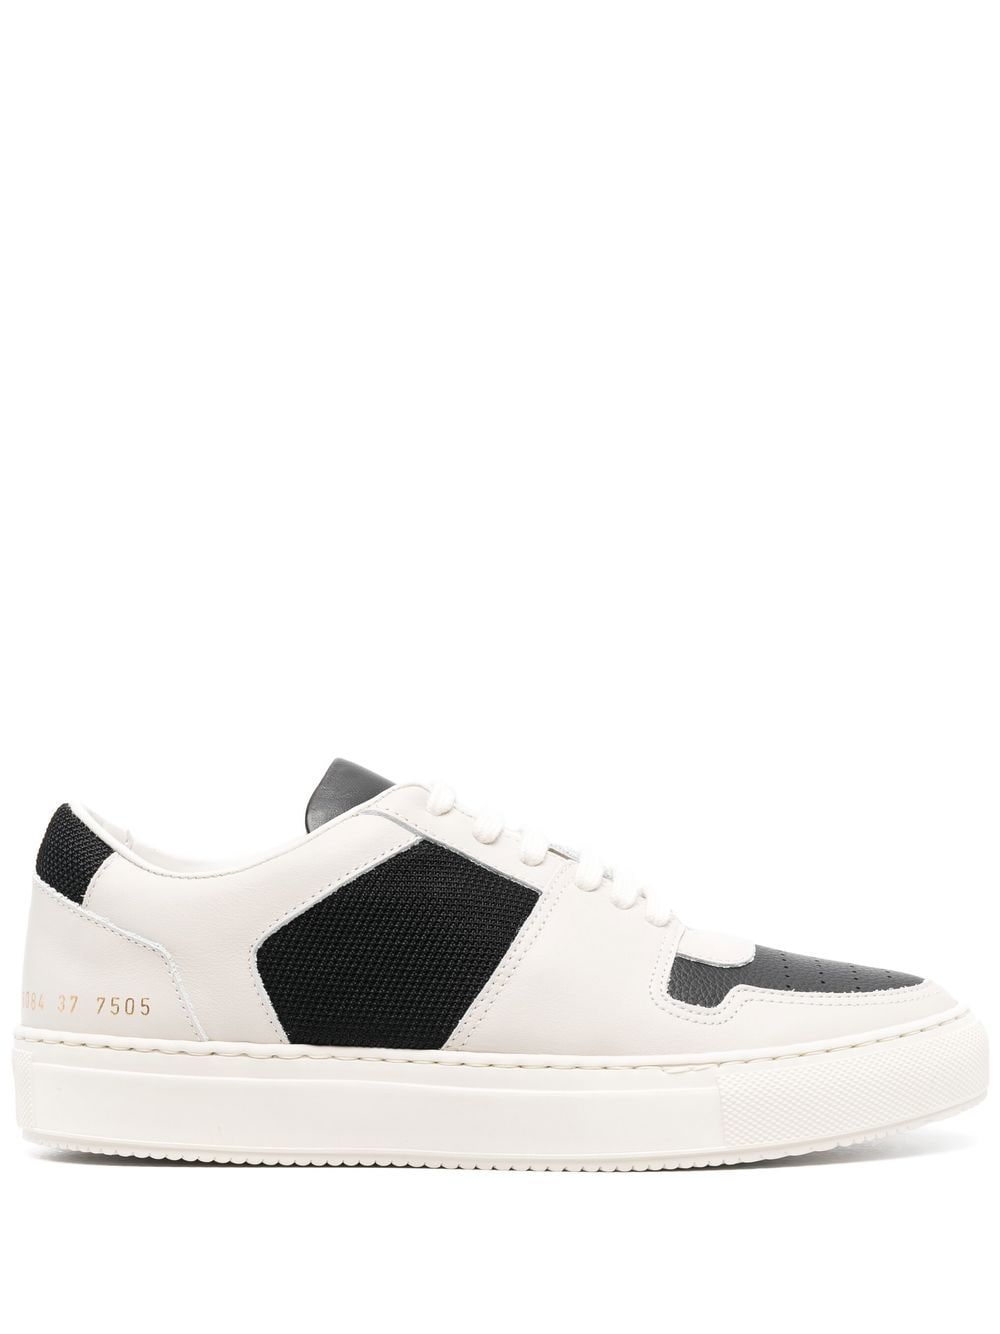 BBall Decades low-top panelled sneakers